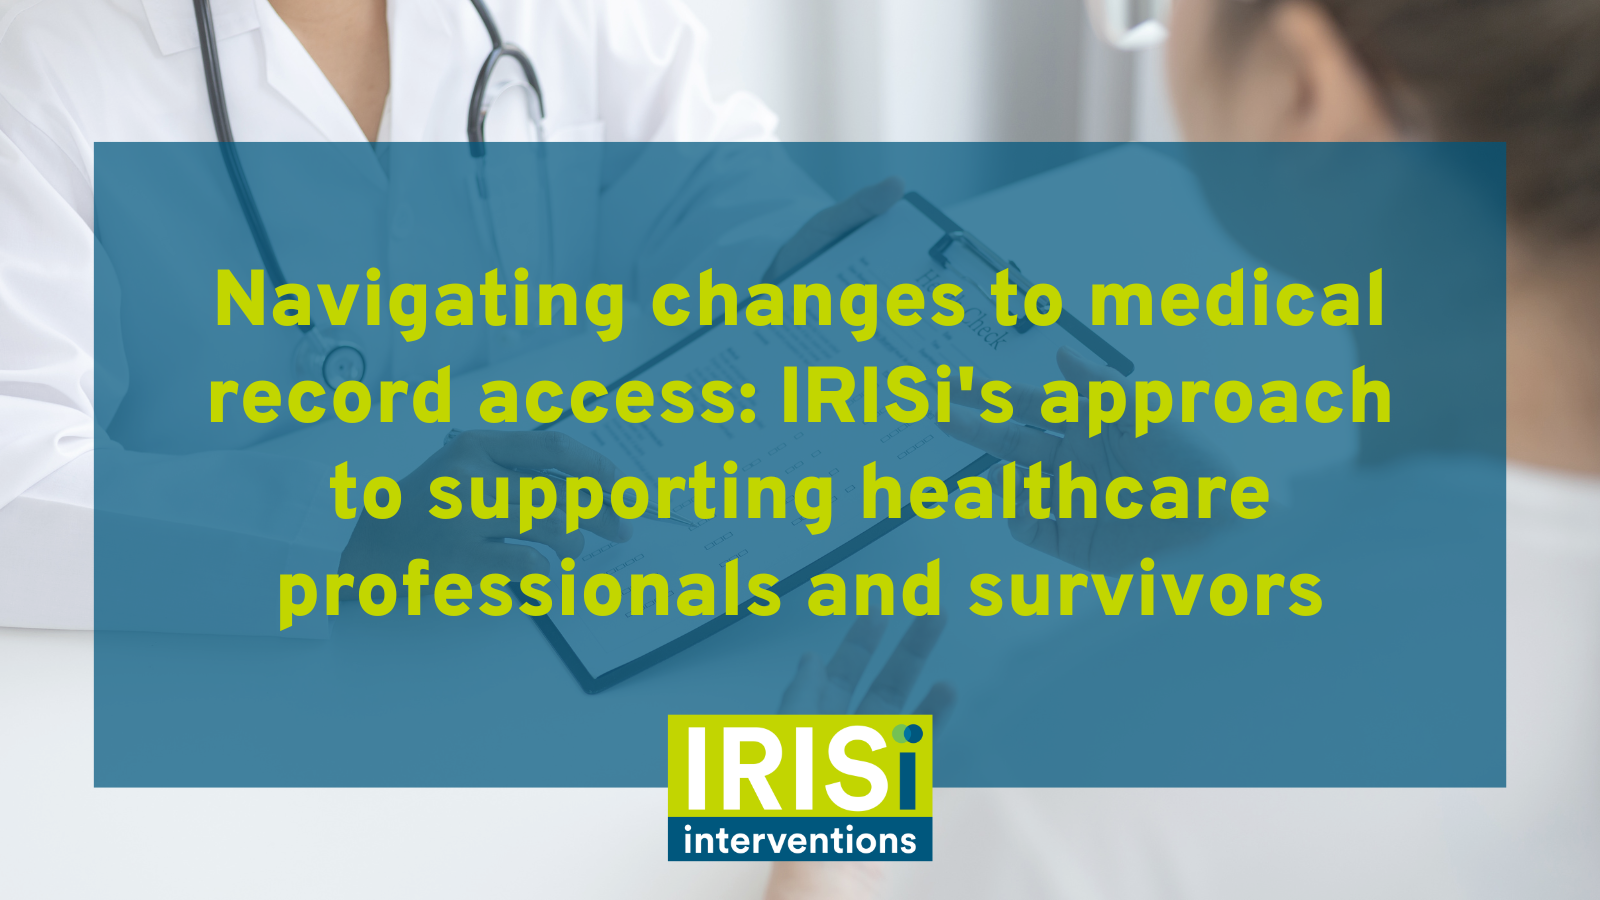 IRISi is committed to supporting health professionals and survivors as they navigate changes to medical record access. Our collaborative efforts with Women's Aid and NHSE aim to address potential risks and provide essential training. Protecting sensitive information related to Domestic Abuse remains a priority.